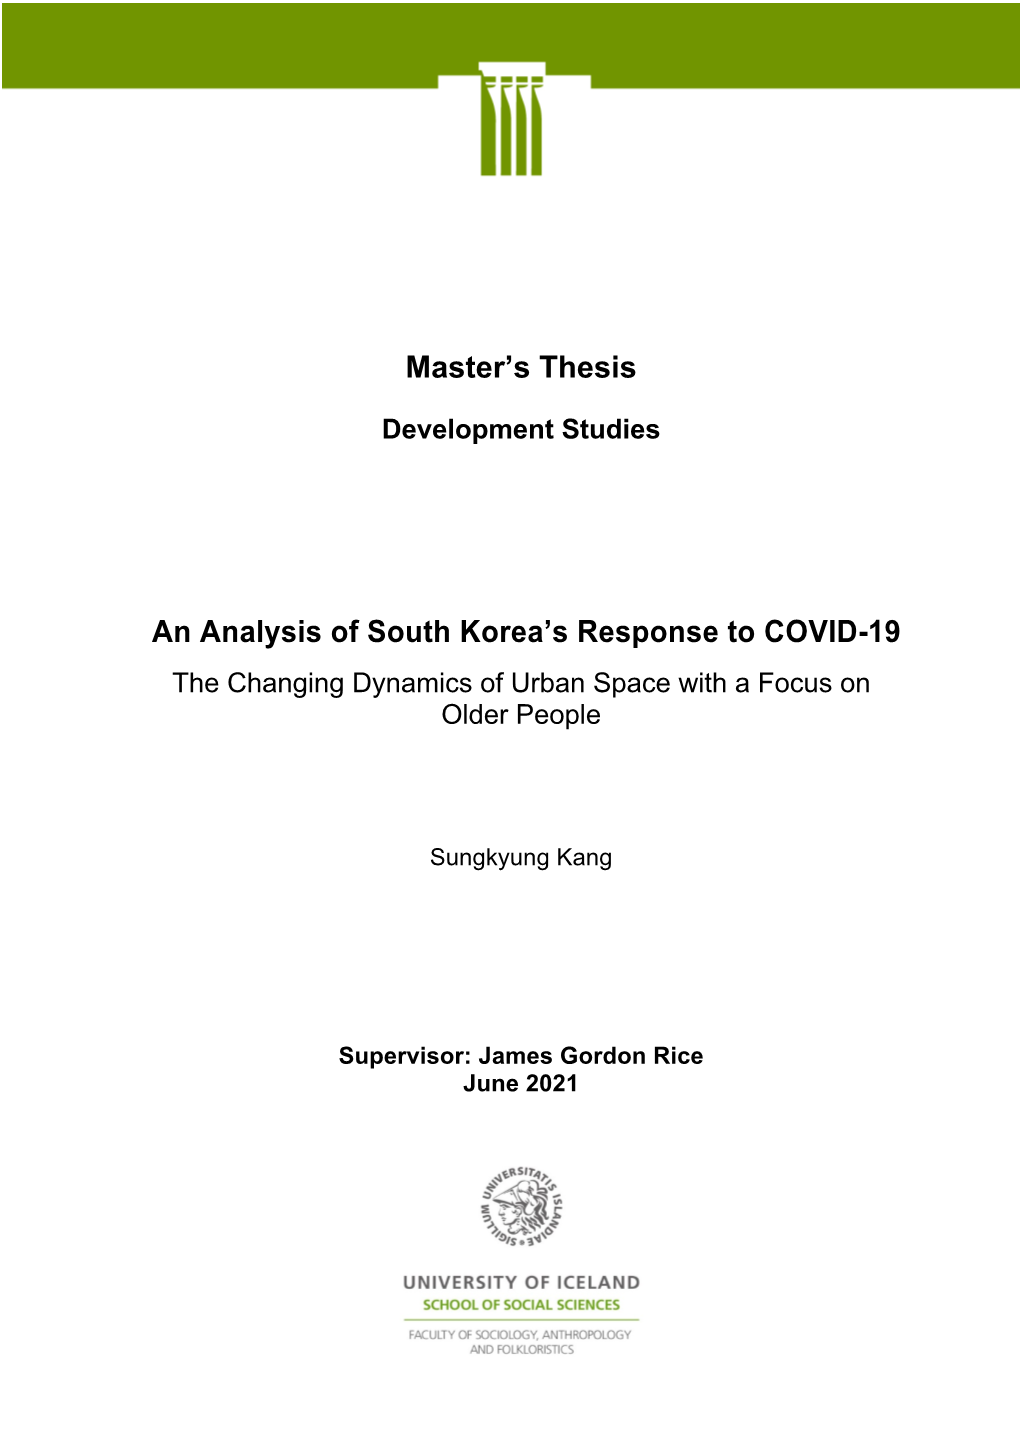 Master's Thesis an Analysis of South Korea's Response to COVID-19